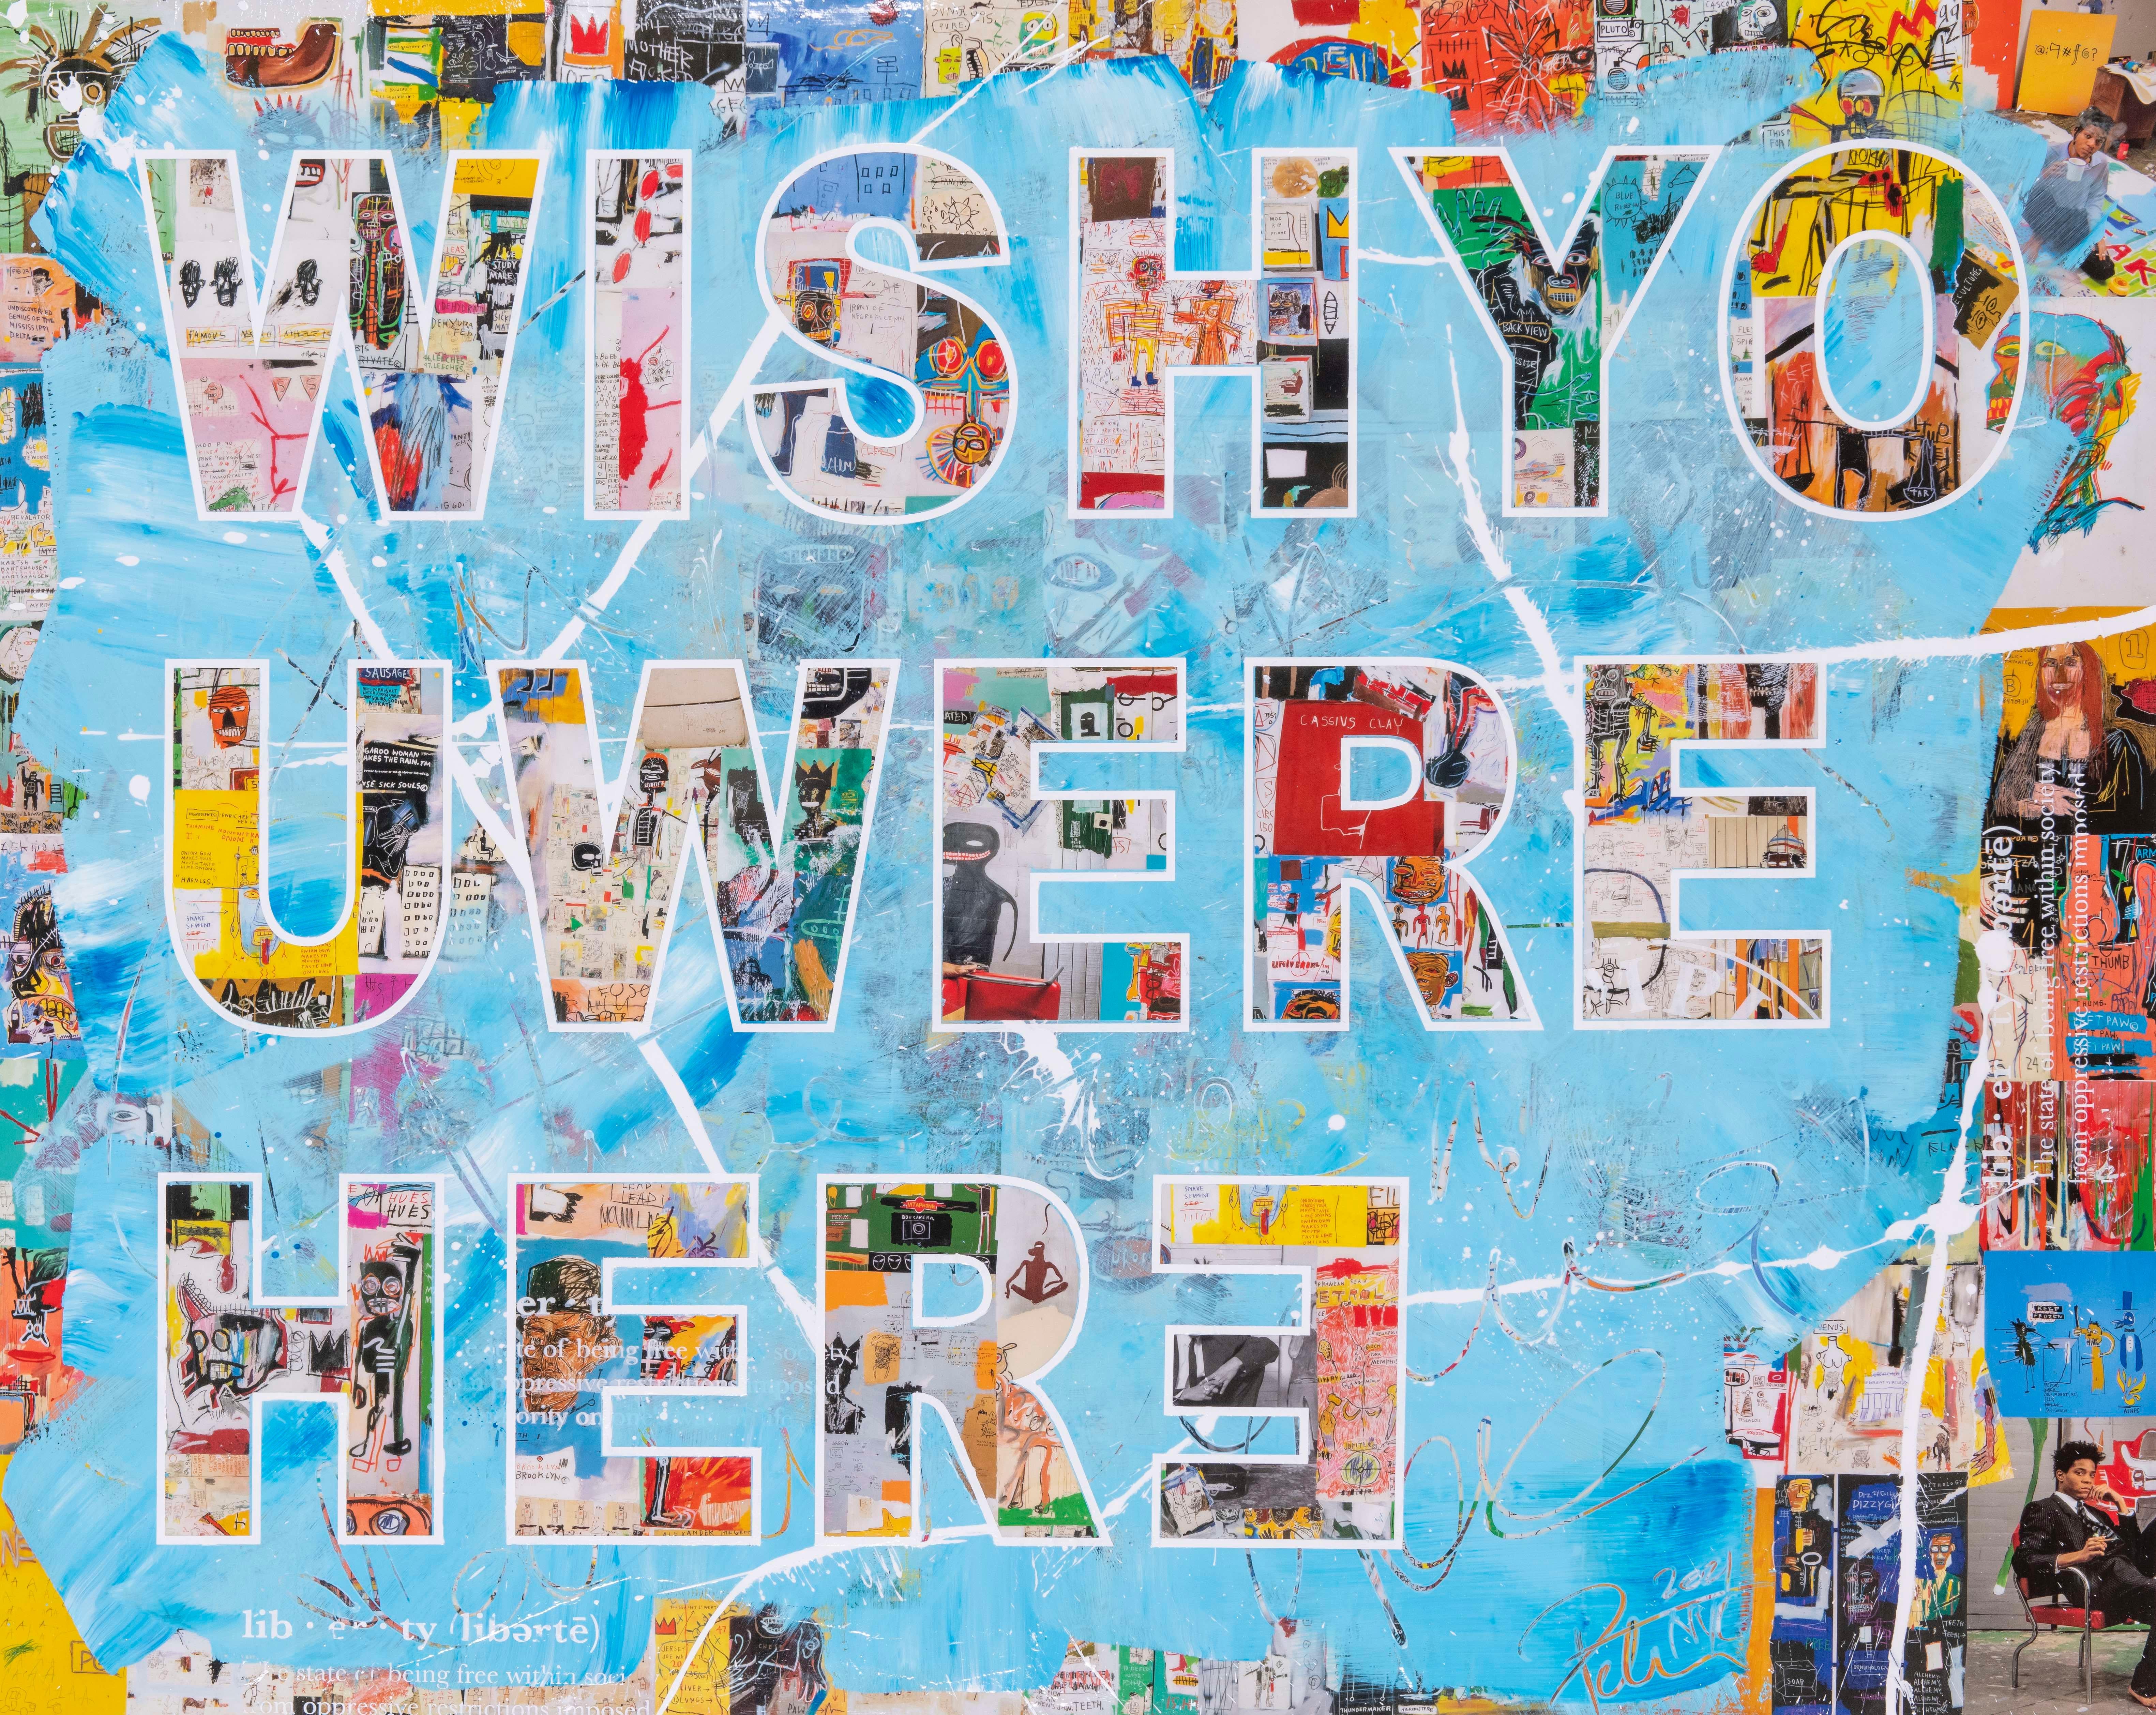 WISH YOU WERE HERE, 2021 - Mixed Media Art by Peter Tunney